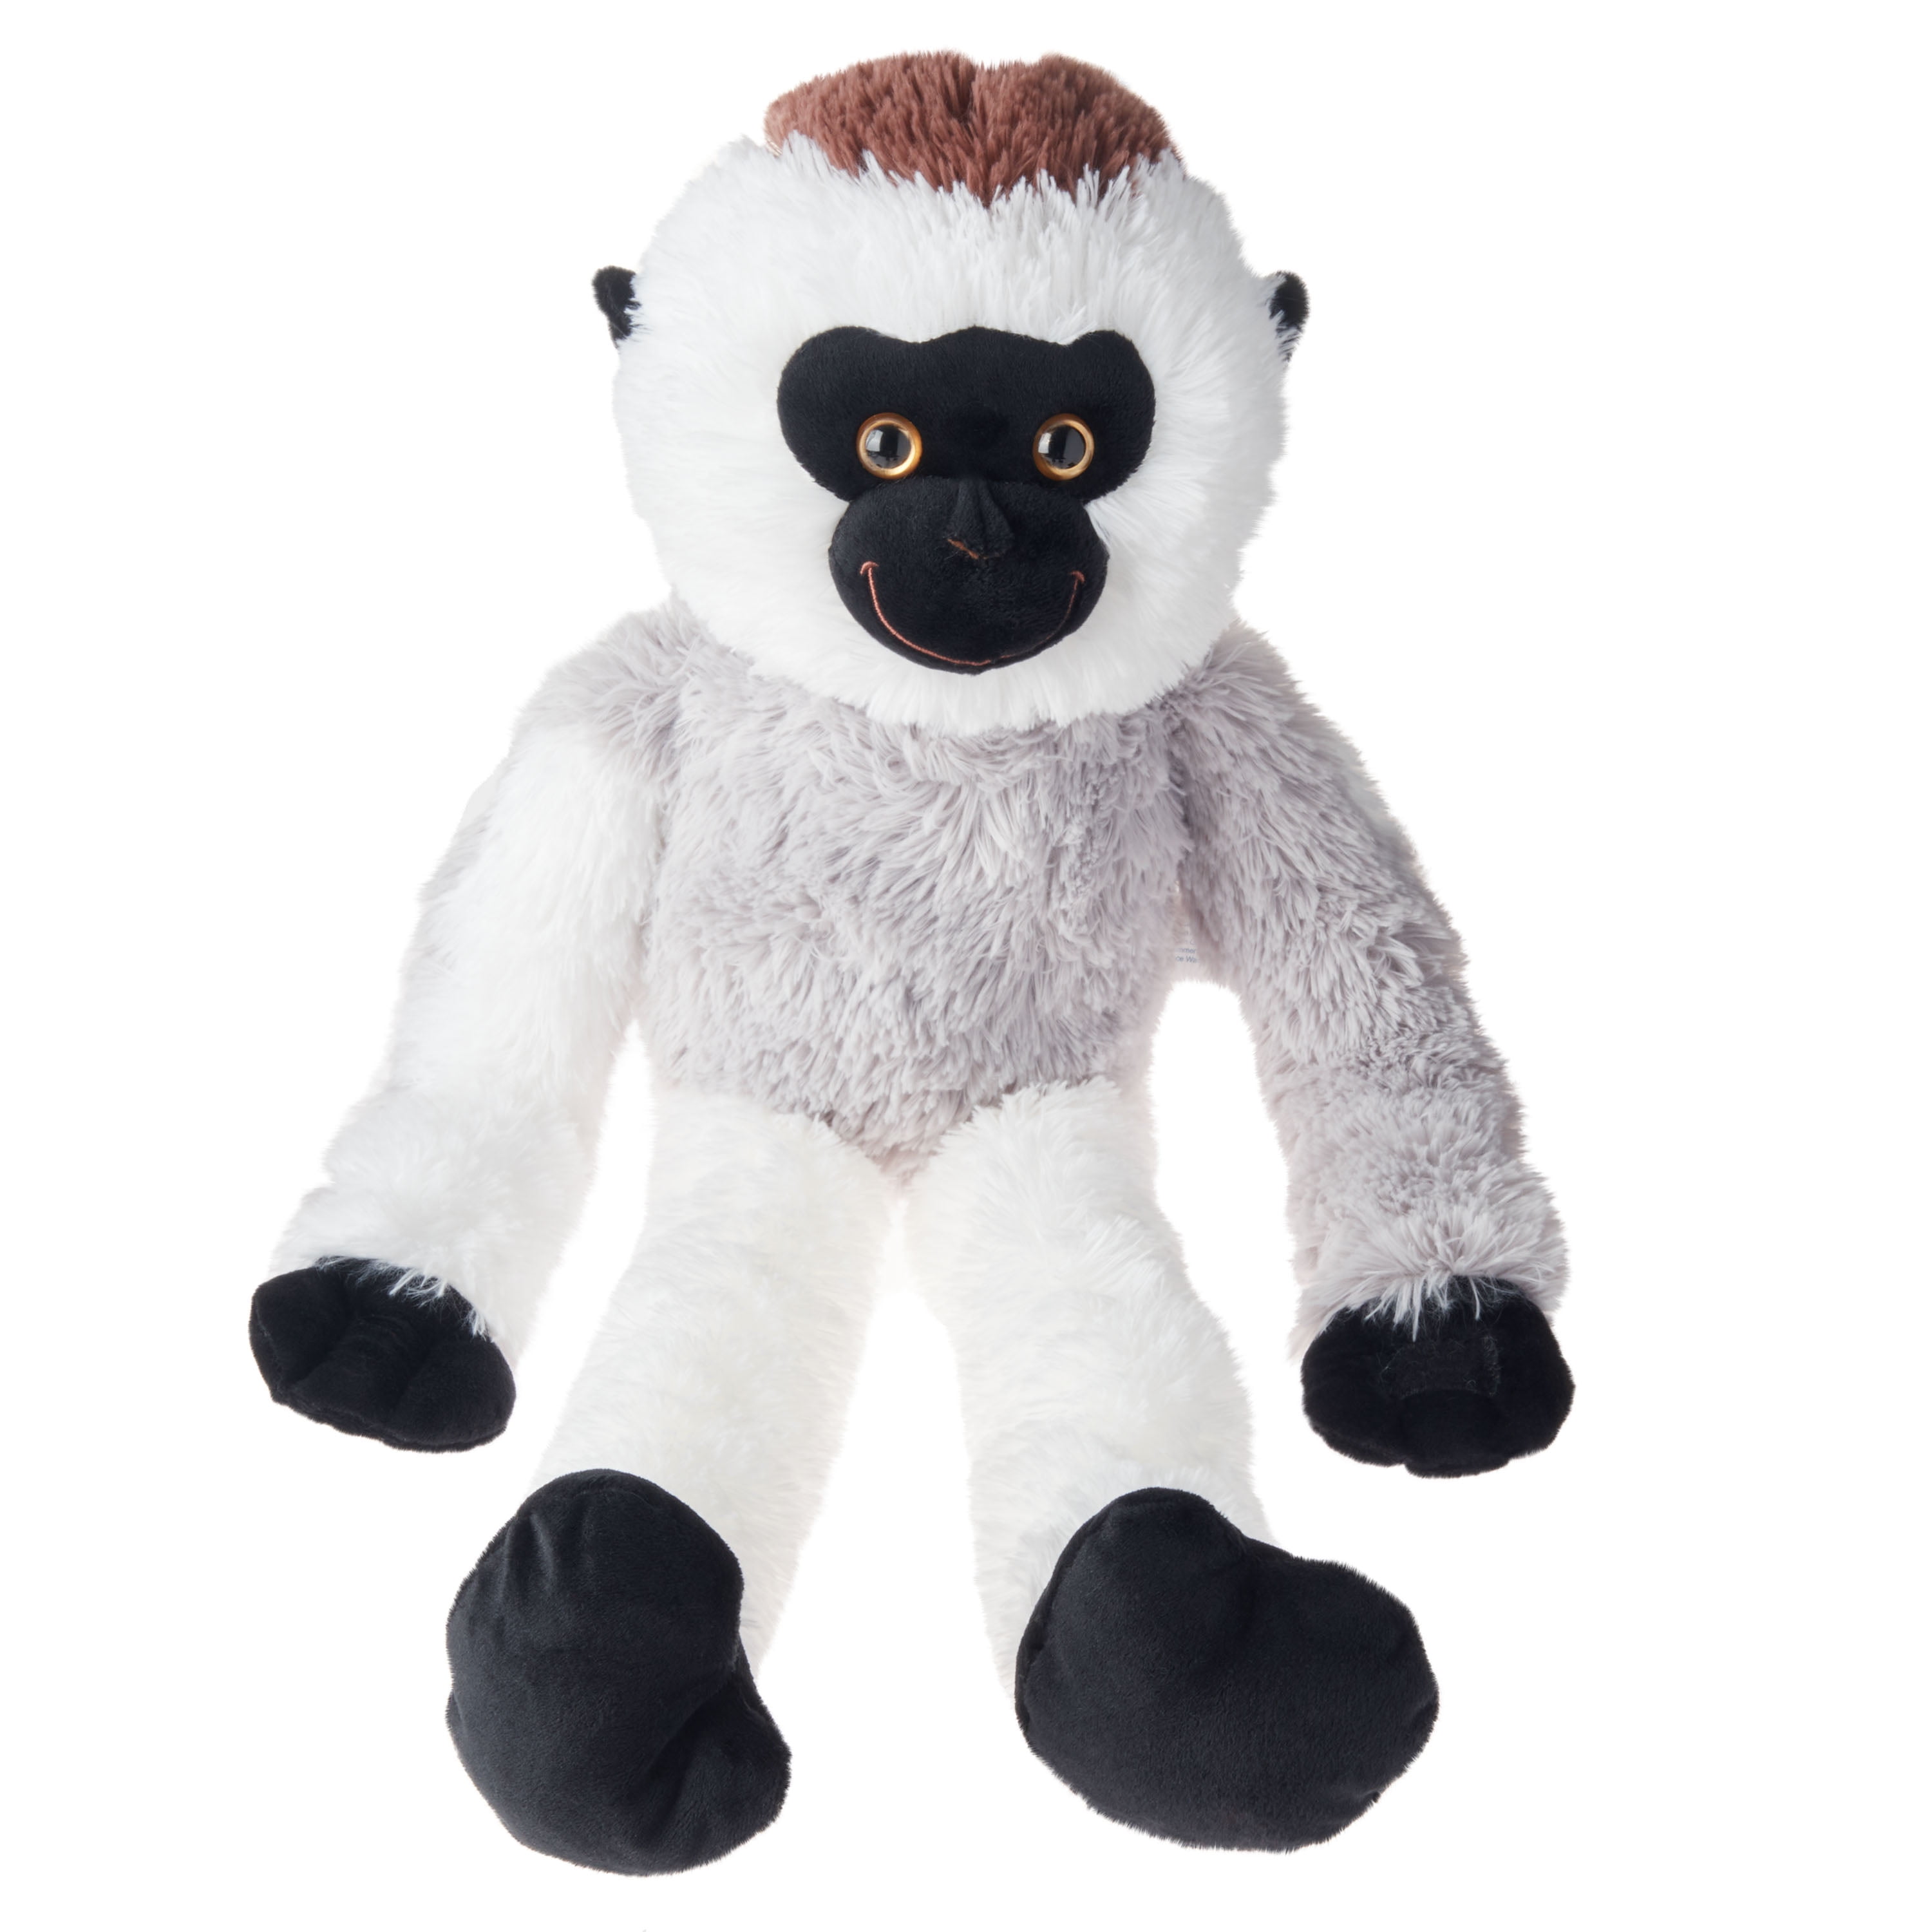 10.5 W x 16 H Valentine’s Day Personalized Valentine Gifts for Kids Him Stuffed Monkeys Her Lets Make Memories Personalized Hugs and Kisses Monkeys 